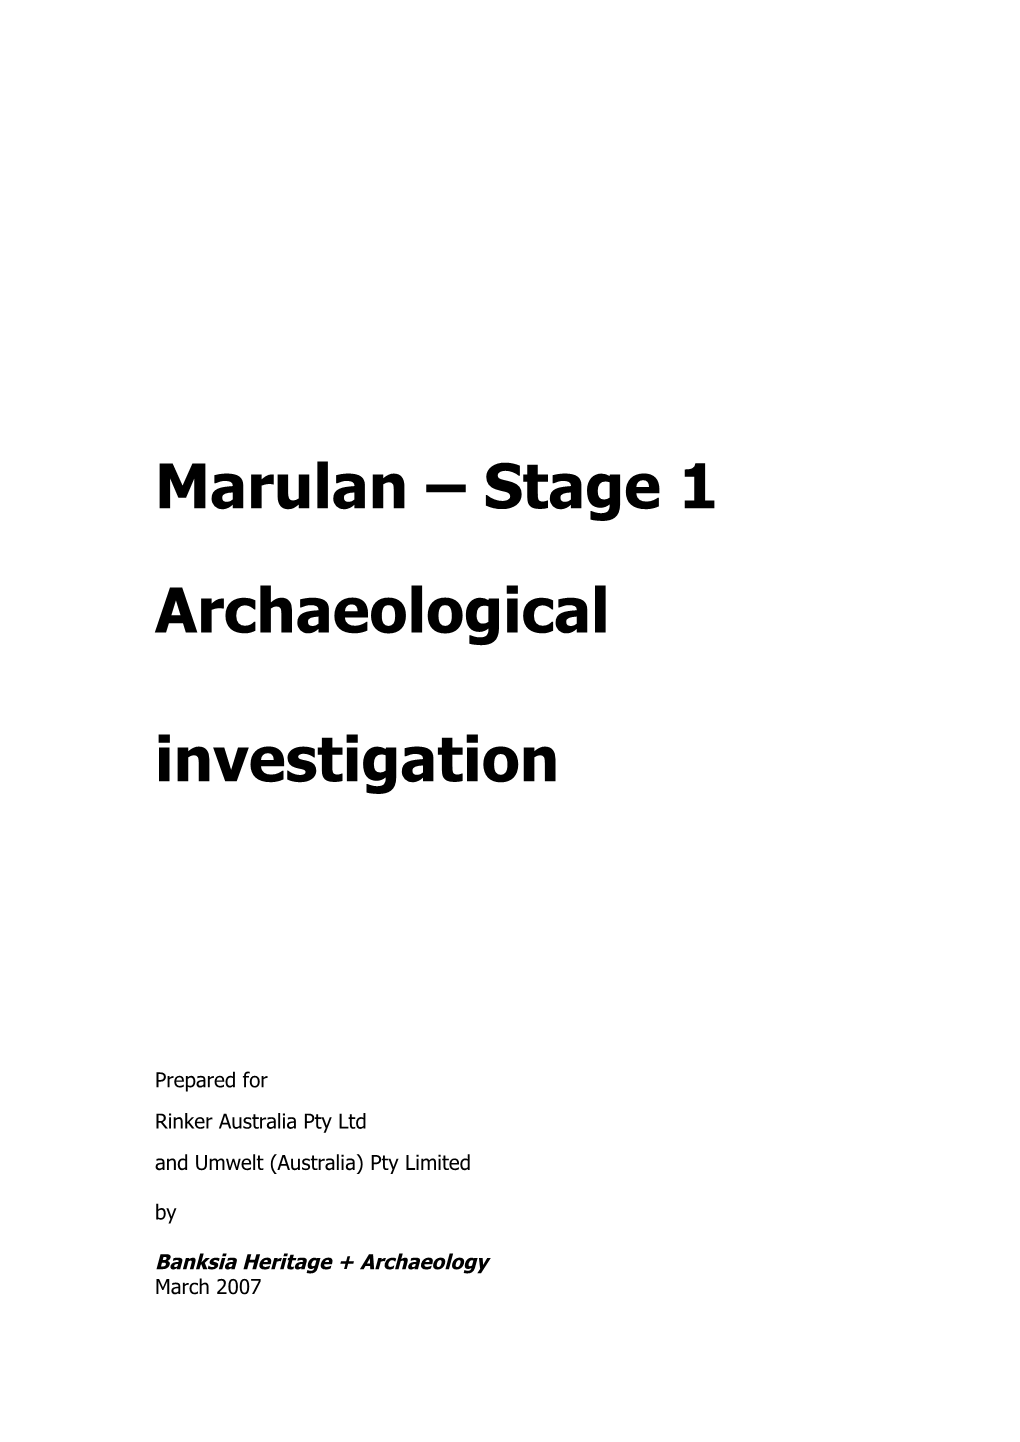 Marulan – Stage 1 Archaeological Investigation